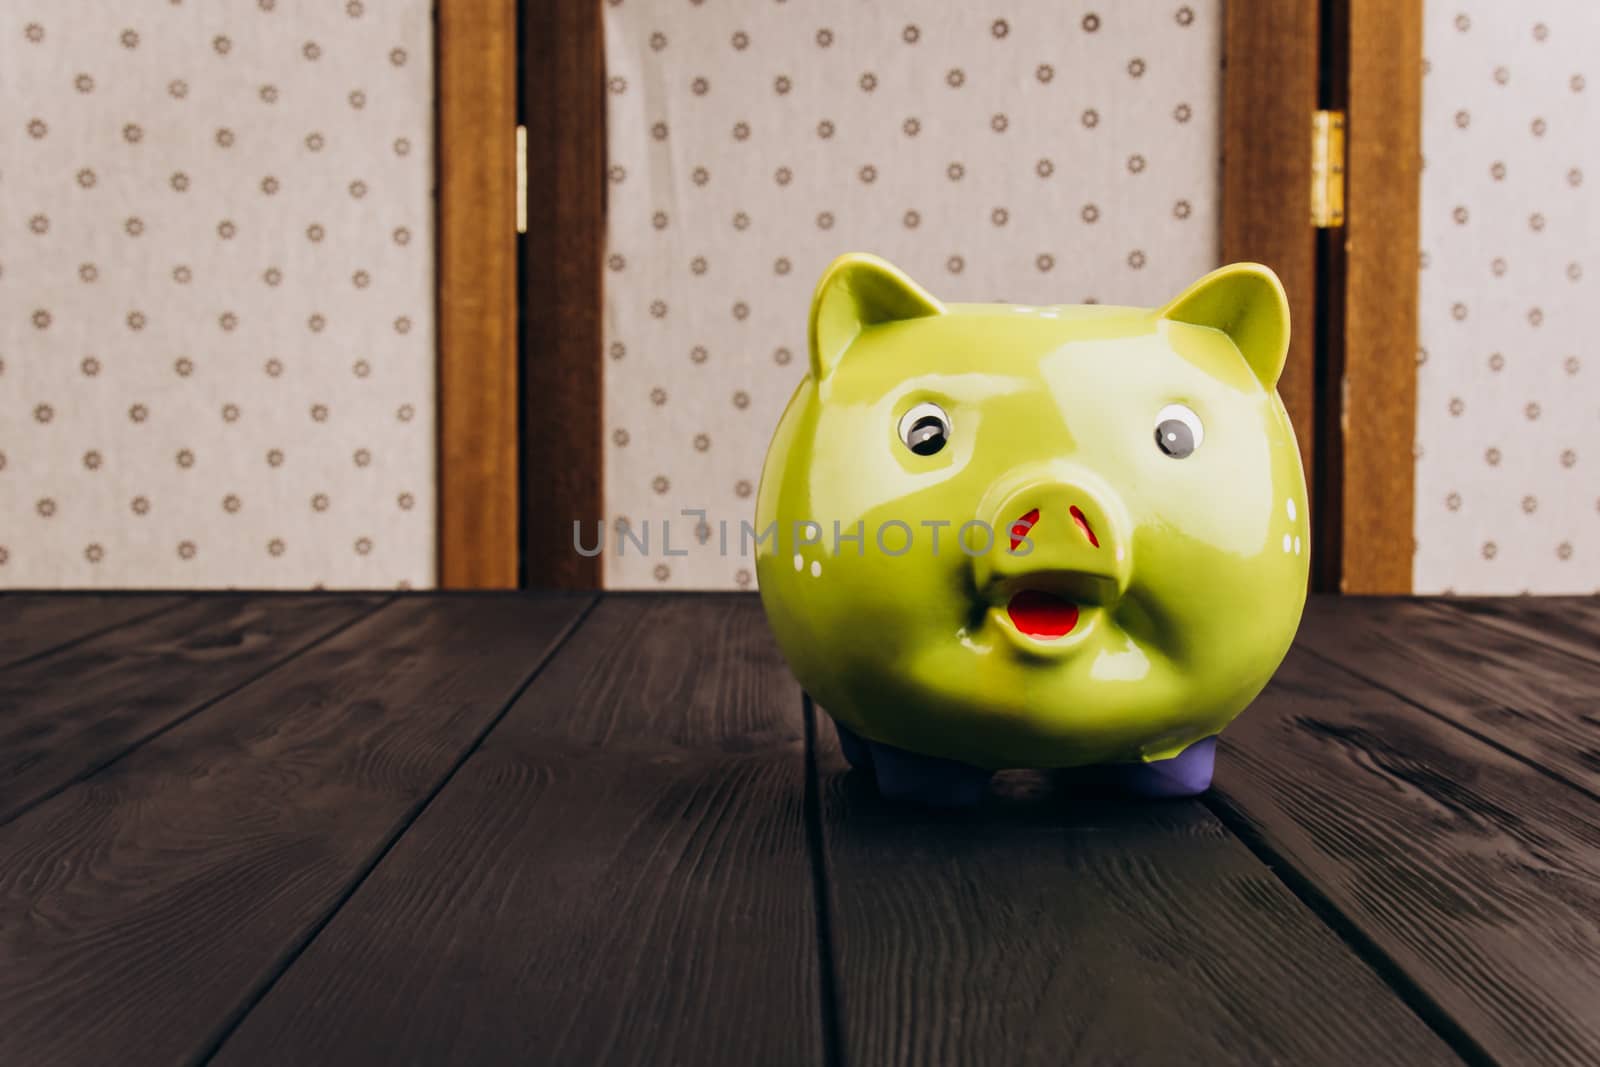 Cute Piggy Bank on the Wooden Table